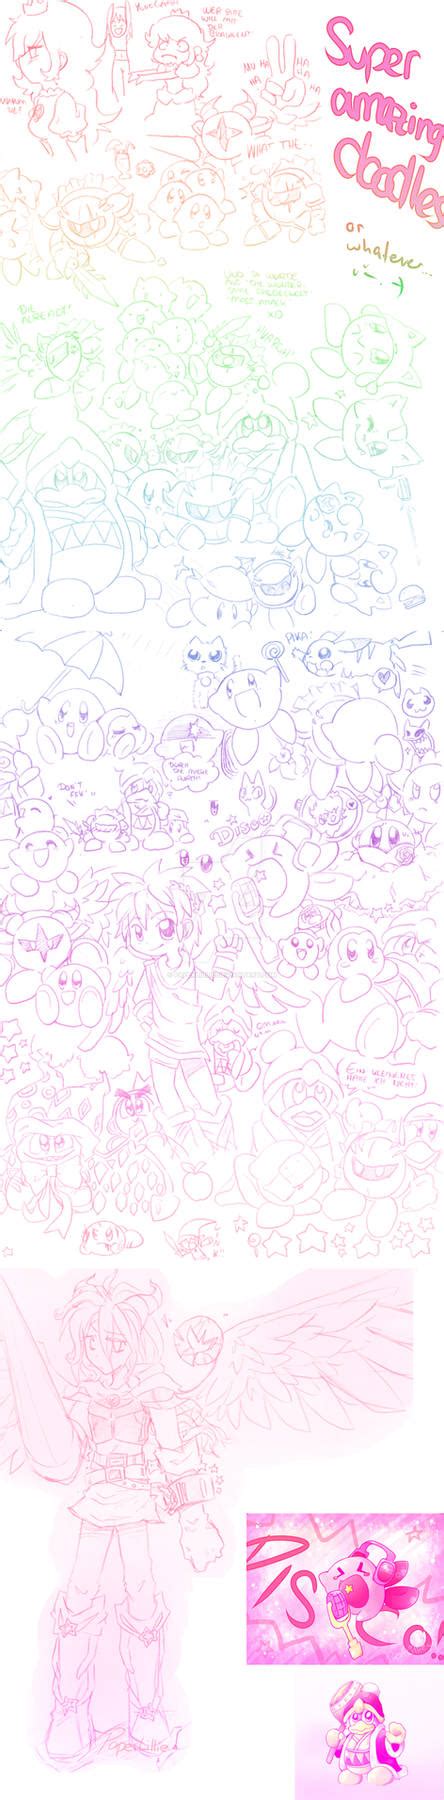 Kirby And More Doodles By Paperlillie On Deviantart